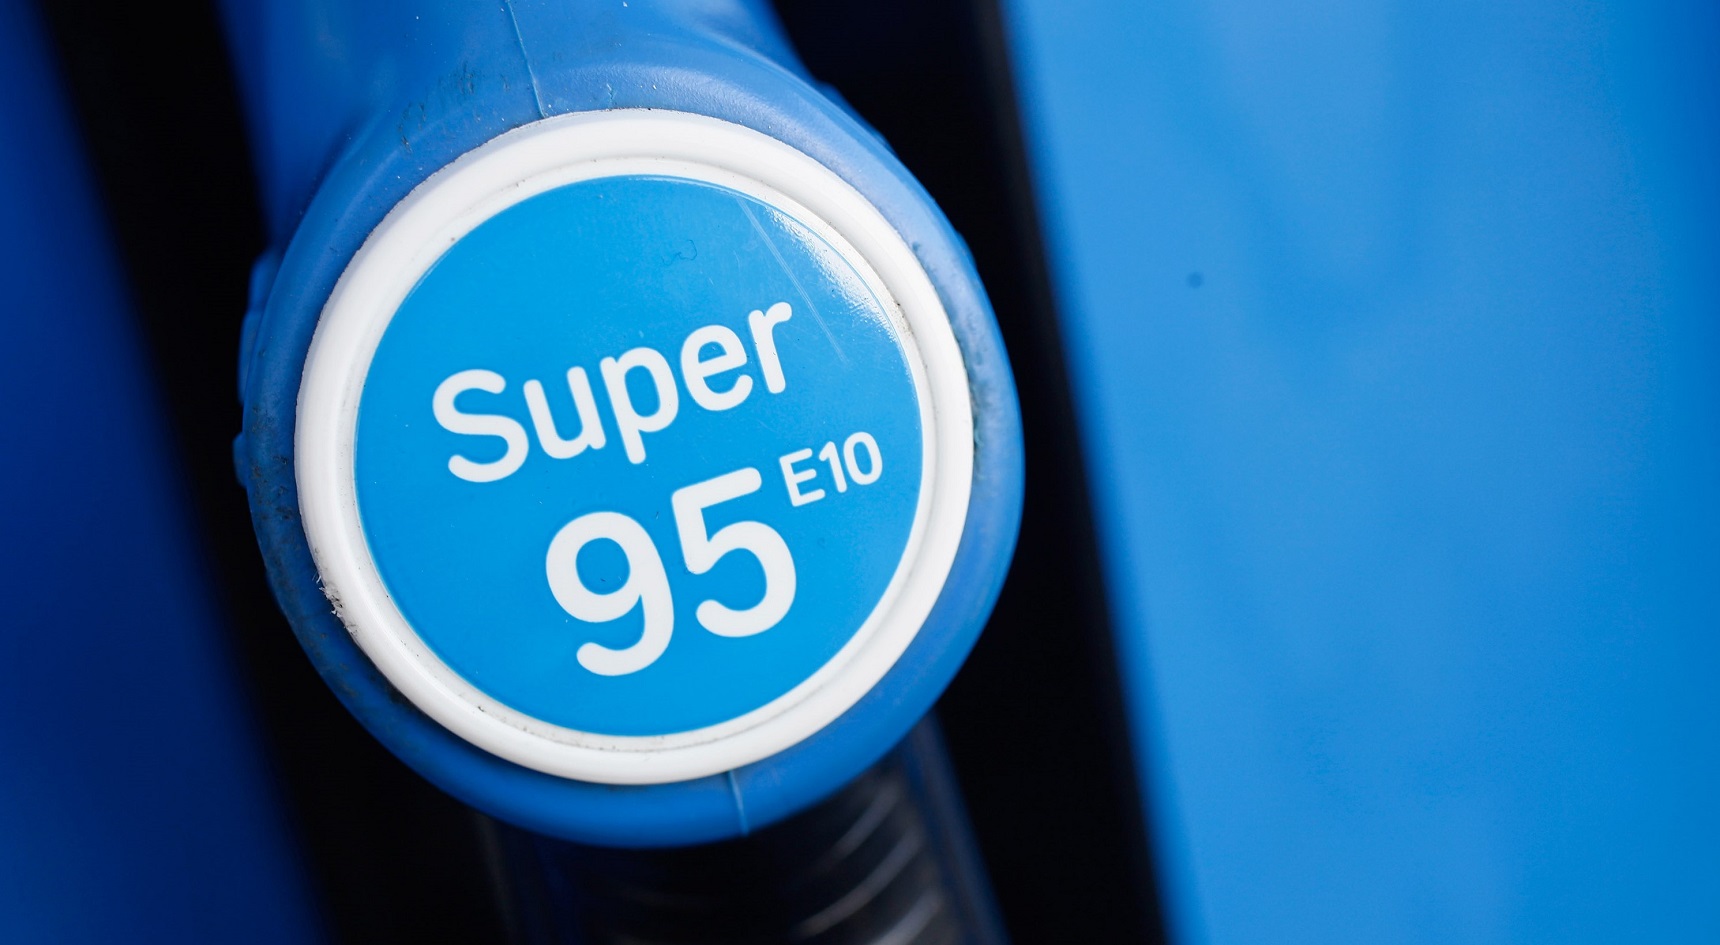 E10 fuel at the petrol station. Image: Getty